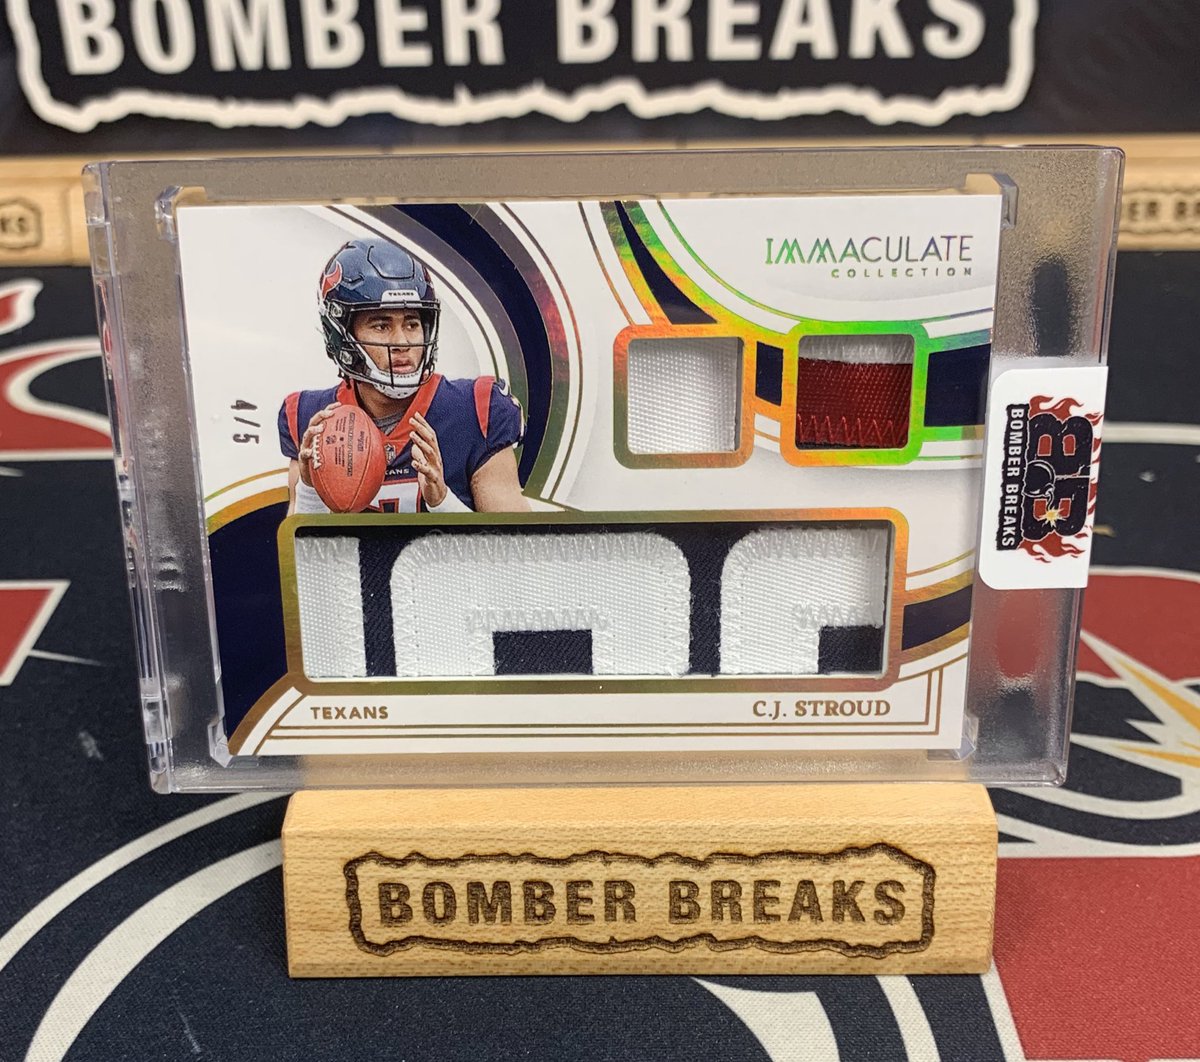 Sweet Rookie Triple Patch /5 of @CJ7STROUD hitting this week in our @paniniamerica Immaculate Football breaks!
🔥🔥 #whodoyoucollect #footballcards #texans #houstontexans #cjstroud #groupbreaks #boxbreaks #thehobby #casebreaks #nfl #boom #collect #tradingcards #immaculate #like